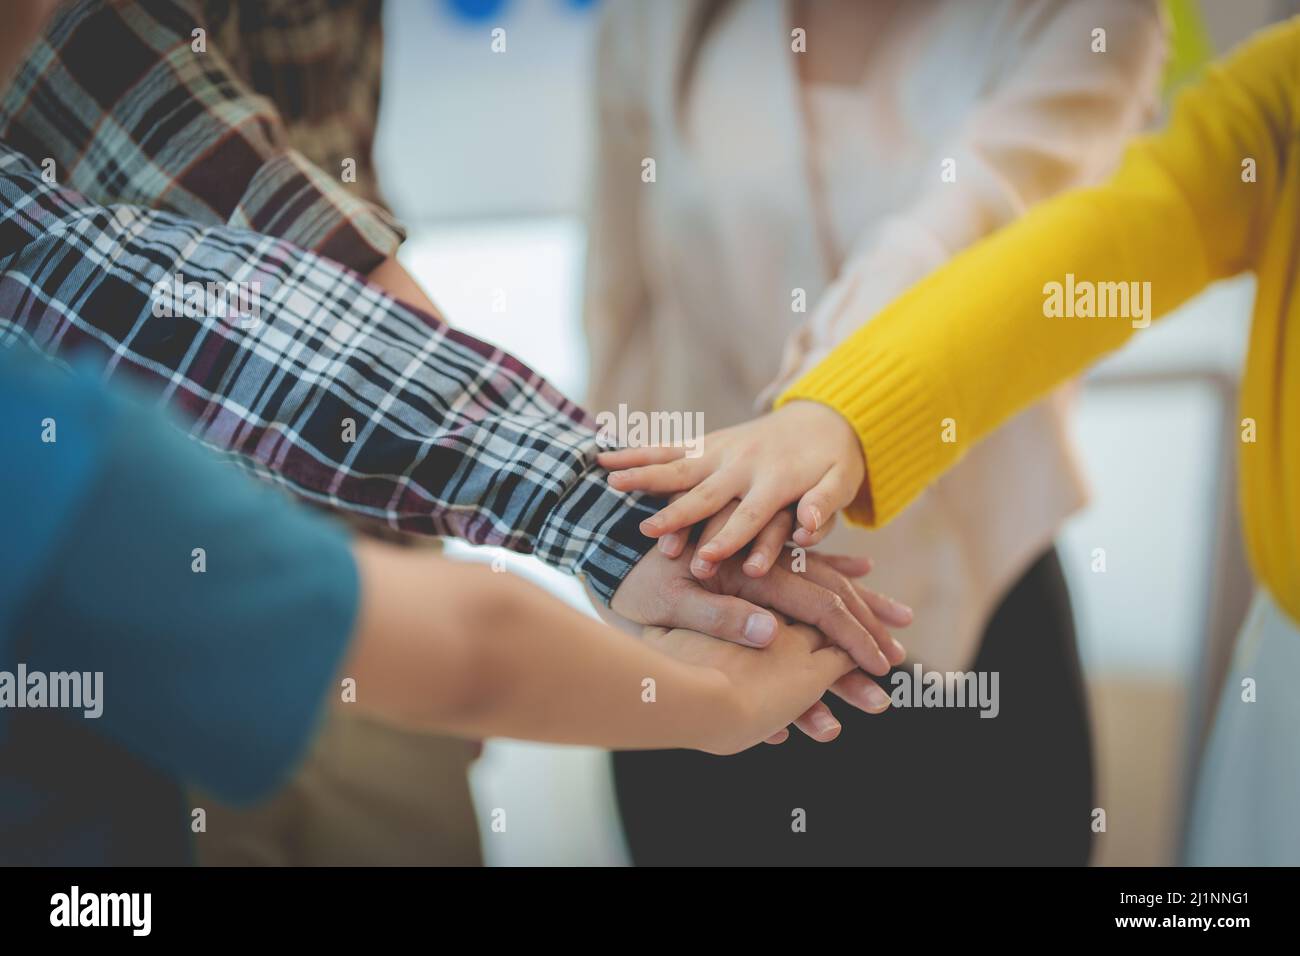 Group of Multiracial people putting their hands working together showing oneness symbol. Stock Photo